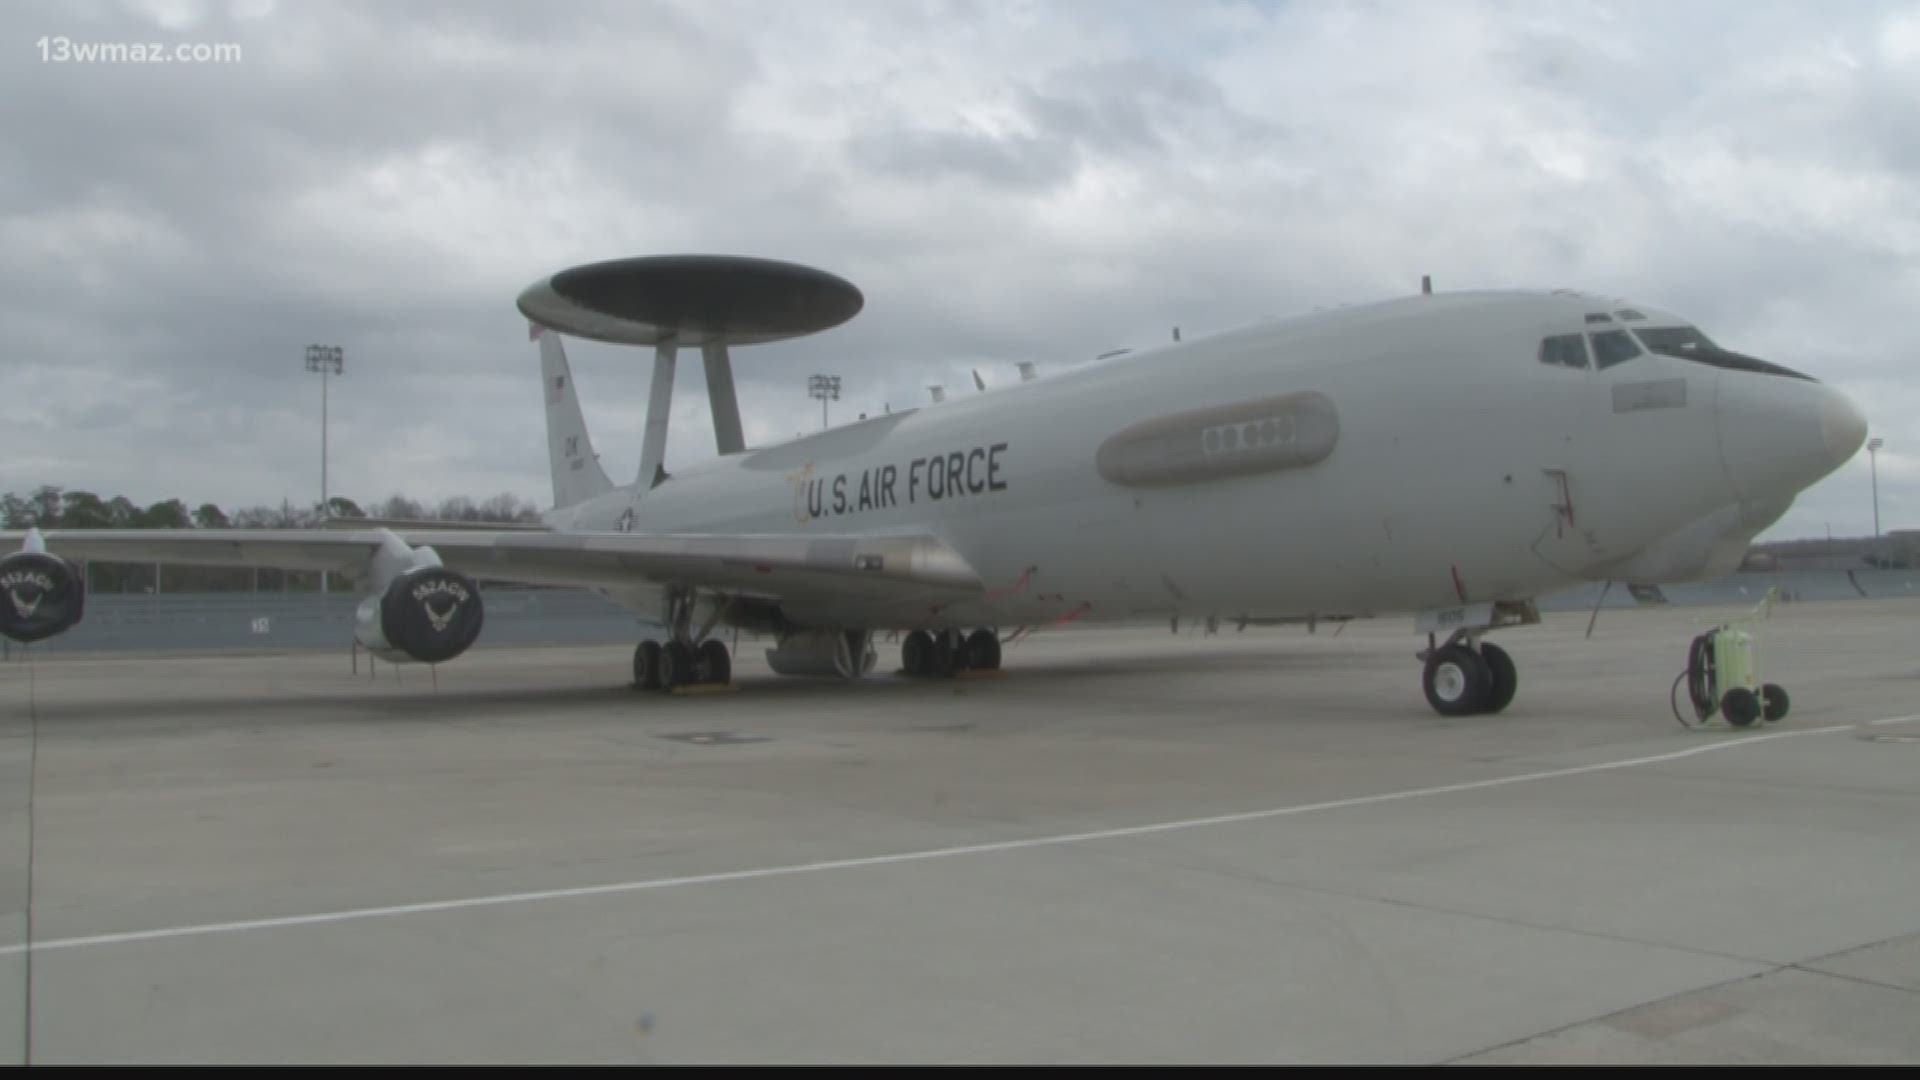 Oklahoma and Central Georgia airmen are training together this month, using key aircraft that flew to Robins Air Force Base.